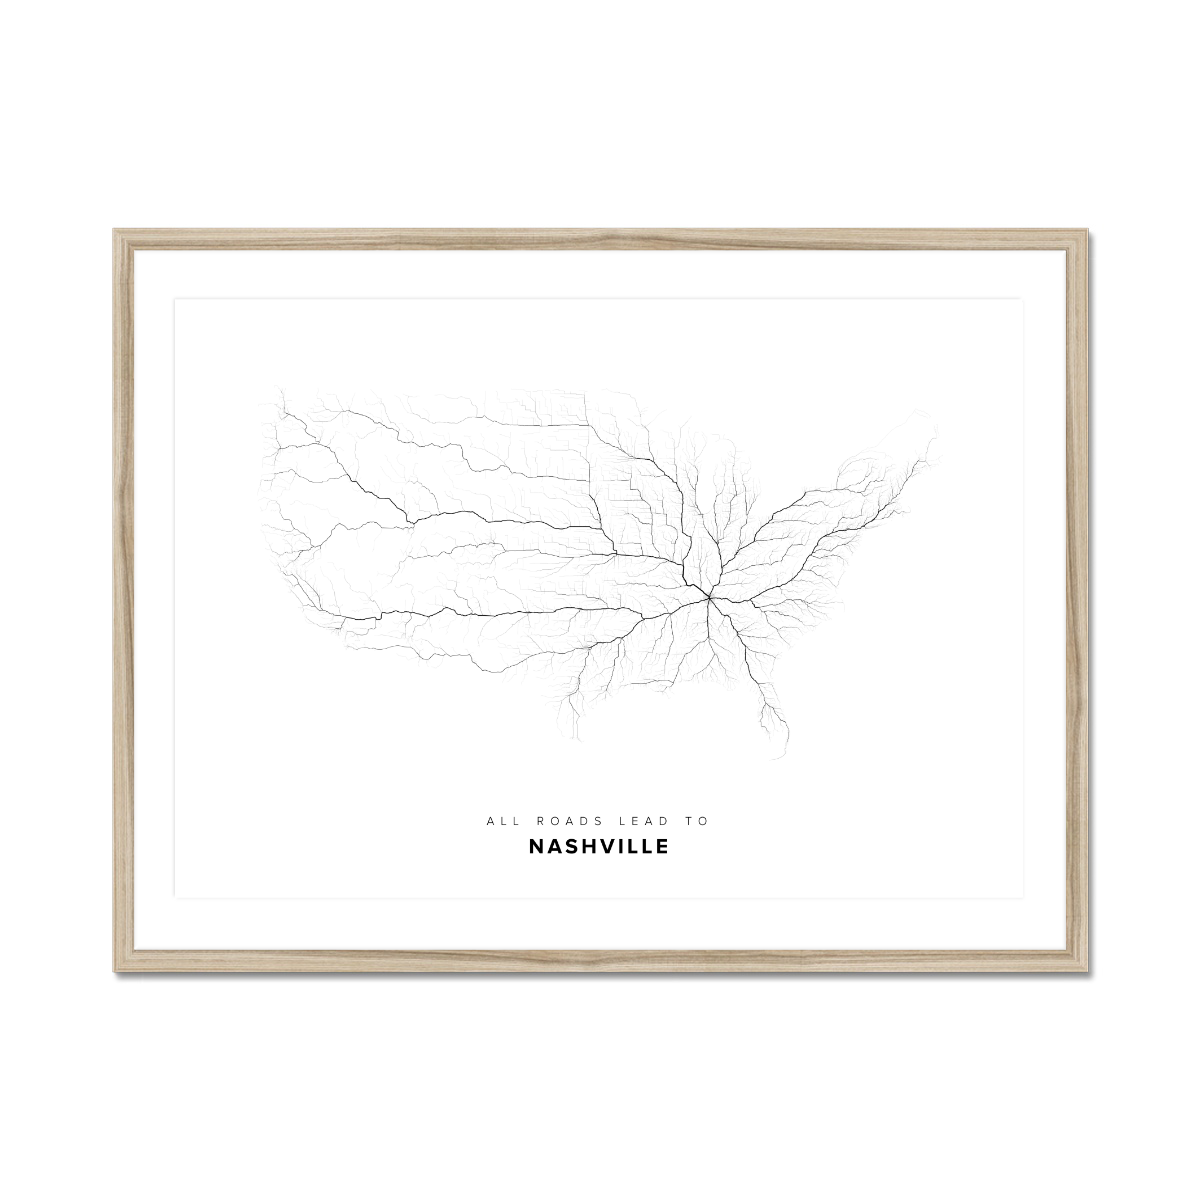 All roads lead to Nashville (United States of America) Fine Art Map Print